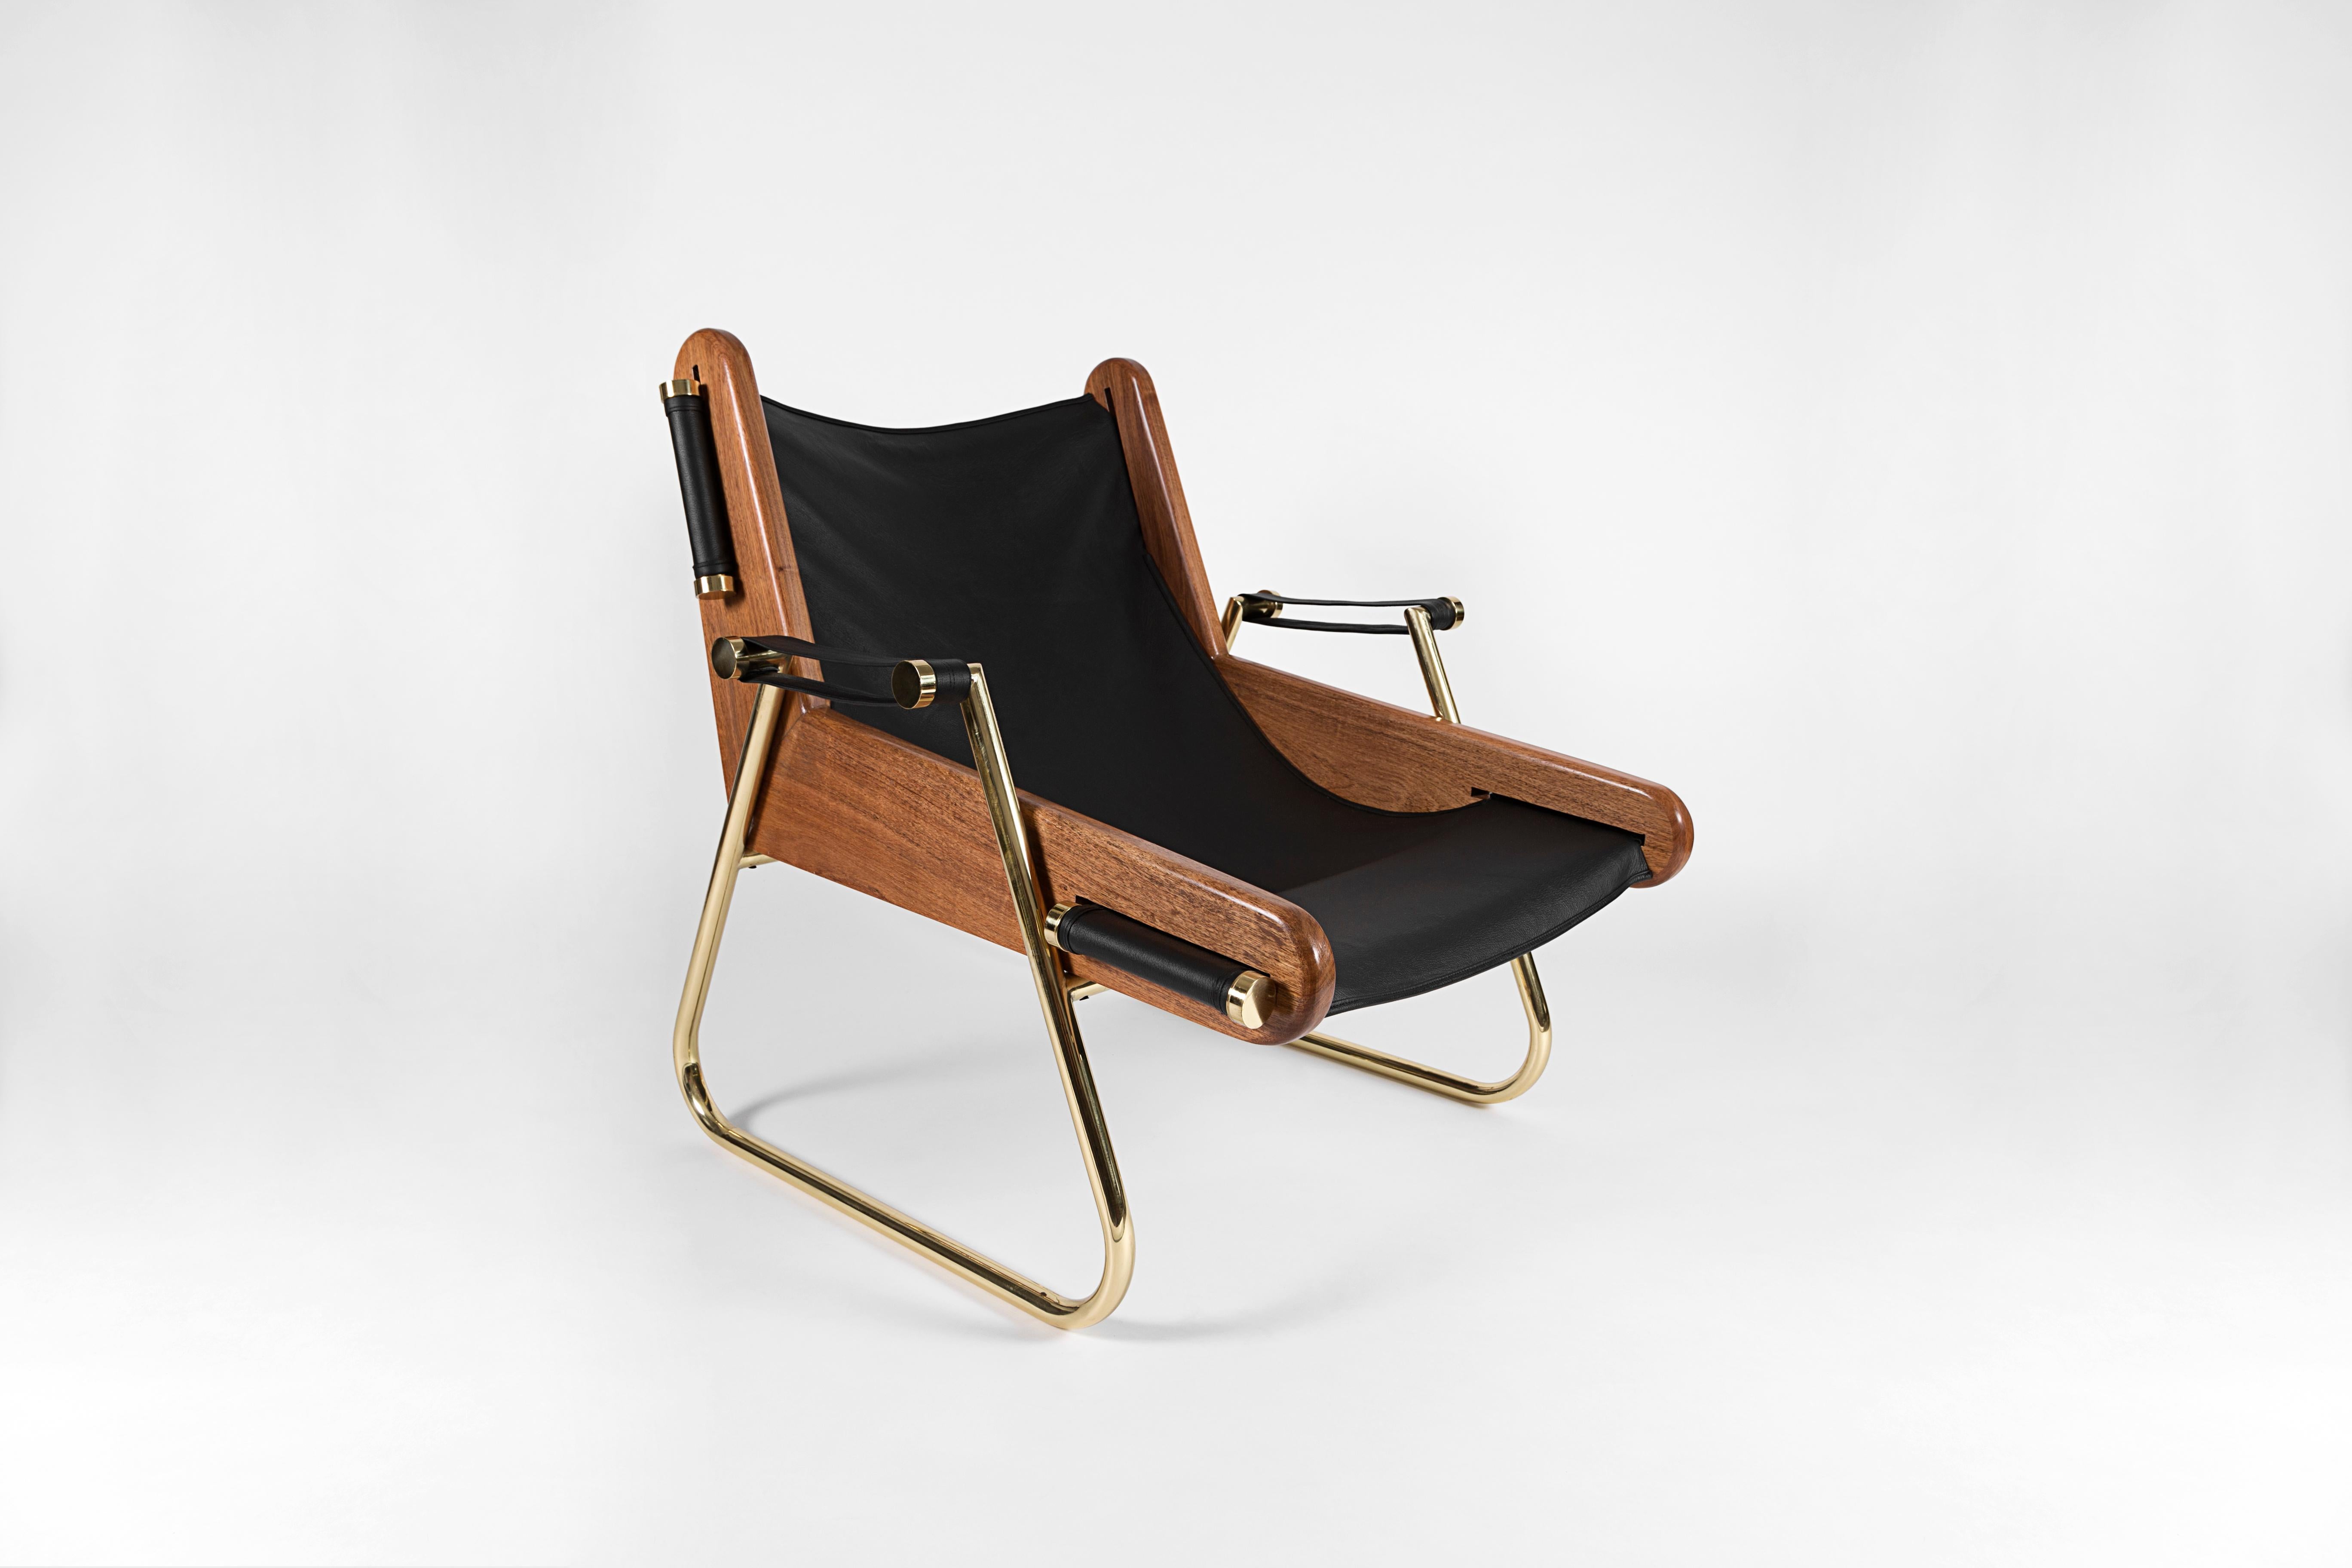 Grappa armchair by Nomade Atelier
Dimensions: D97 x W 77 x H90 cm
Material: Brass, Walnut, Leather.
Available in black leather. For others finishes.

Form meets function in this sleek yet extremely comfortable suspended leather sling chaise. All